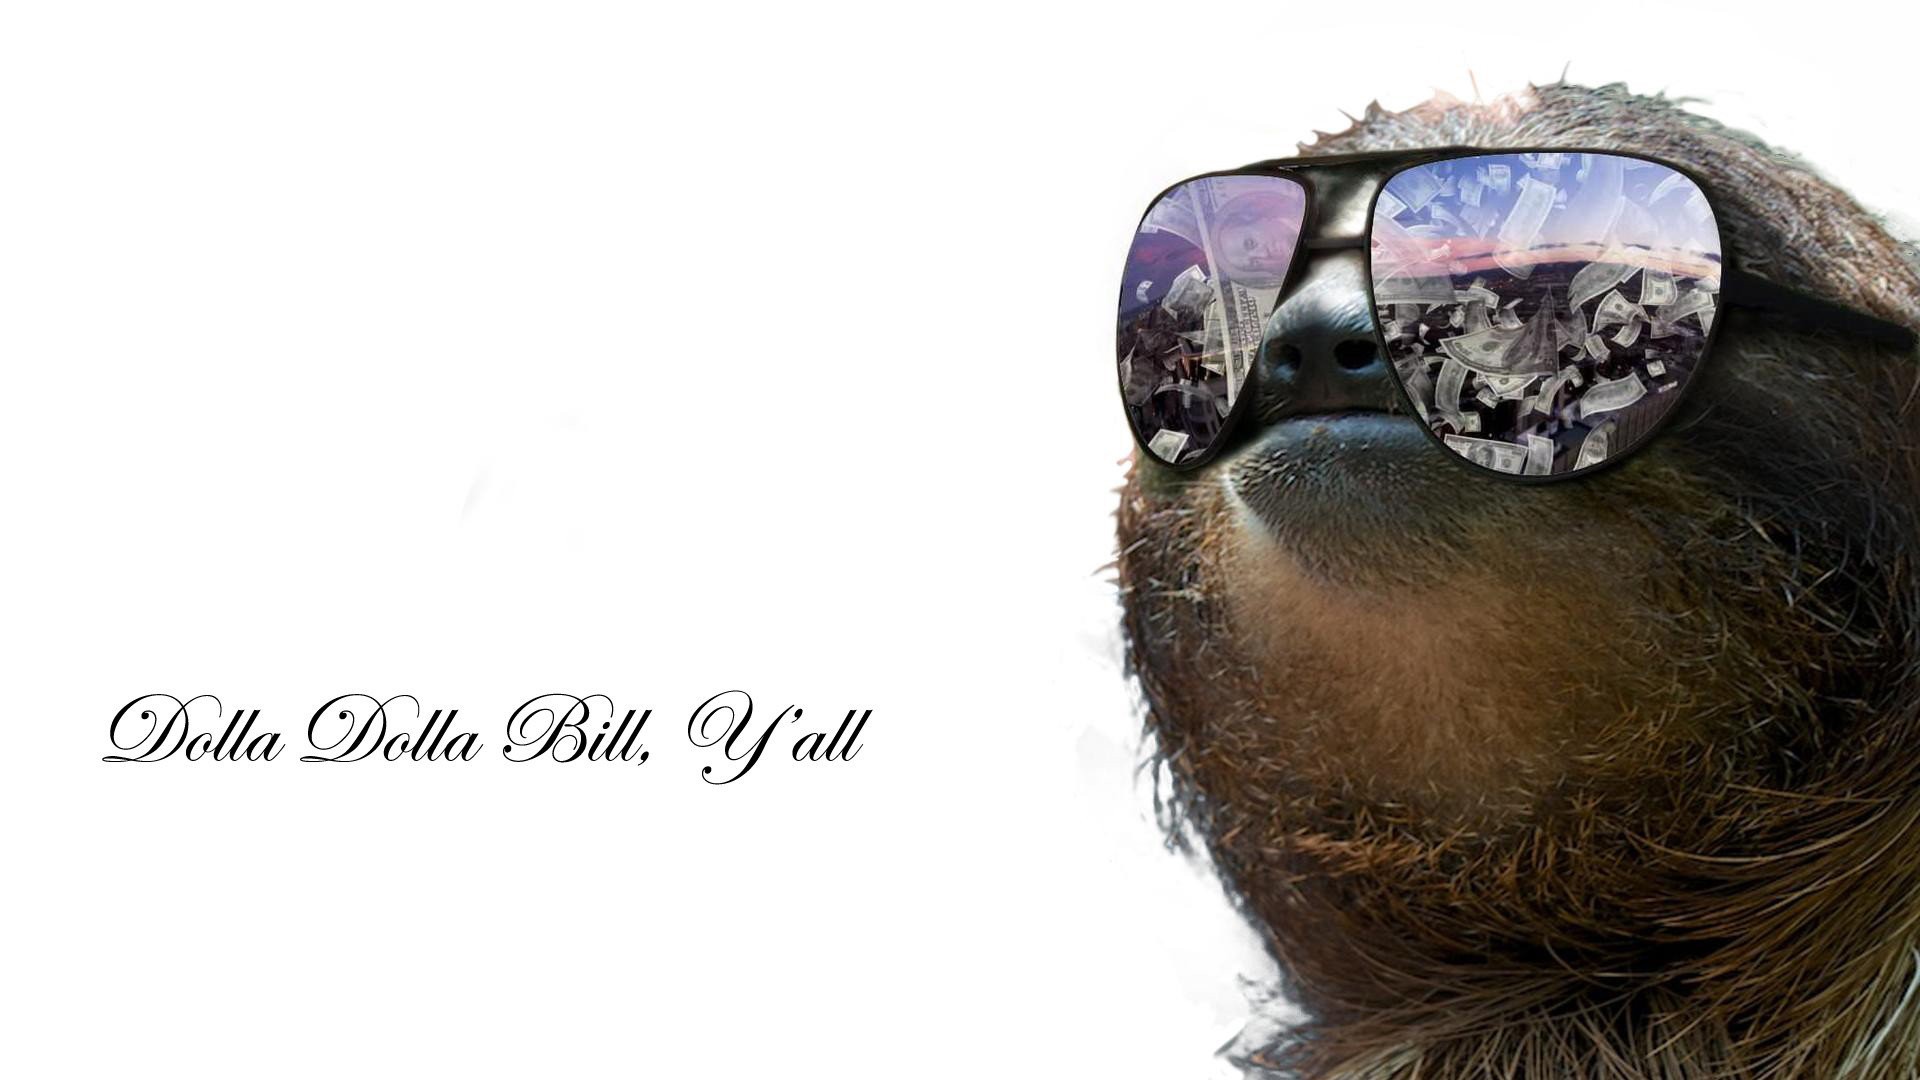 General 1920x1080 sloths quote glasses digital art typography sunglasses animals mammals simple background